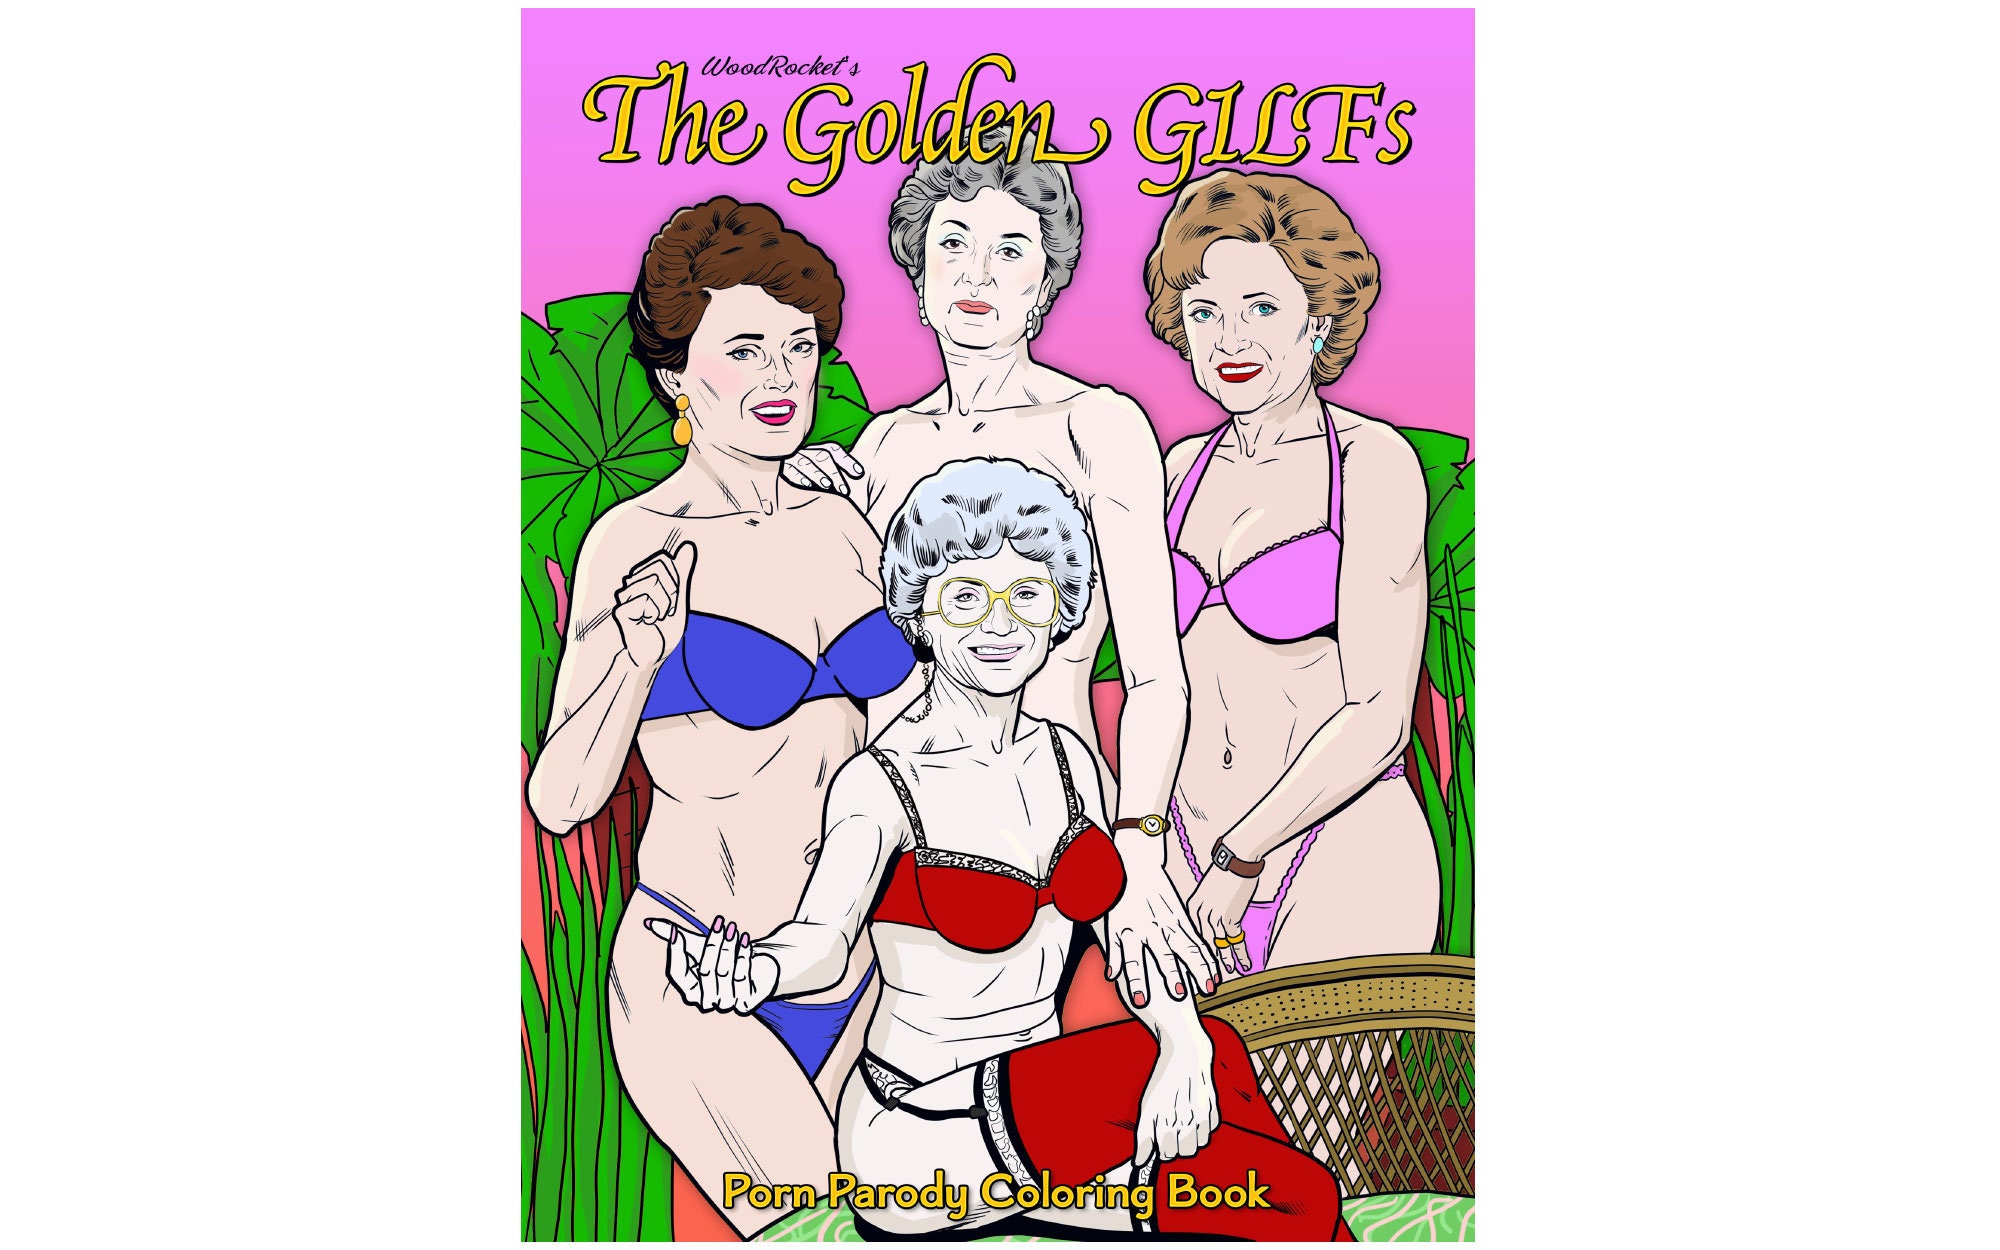 The Golden Gilfs Golden Girls Adult Parody Coloring Book - Etsy